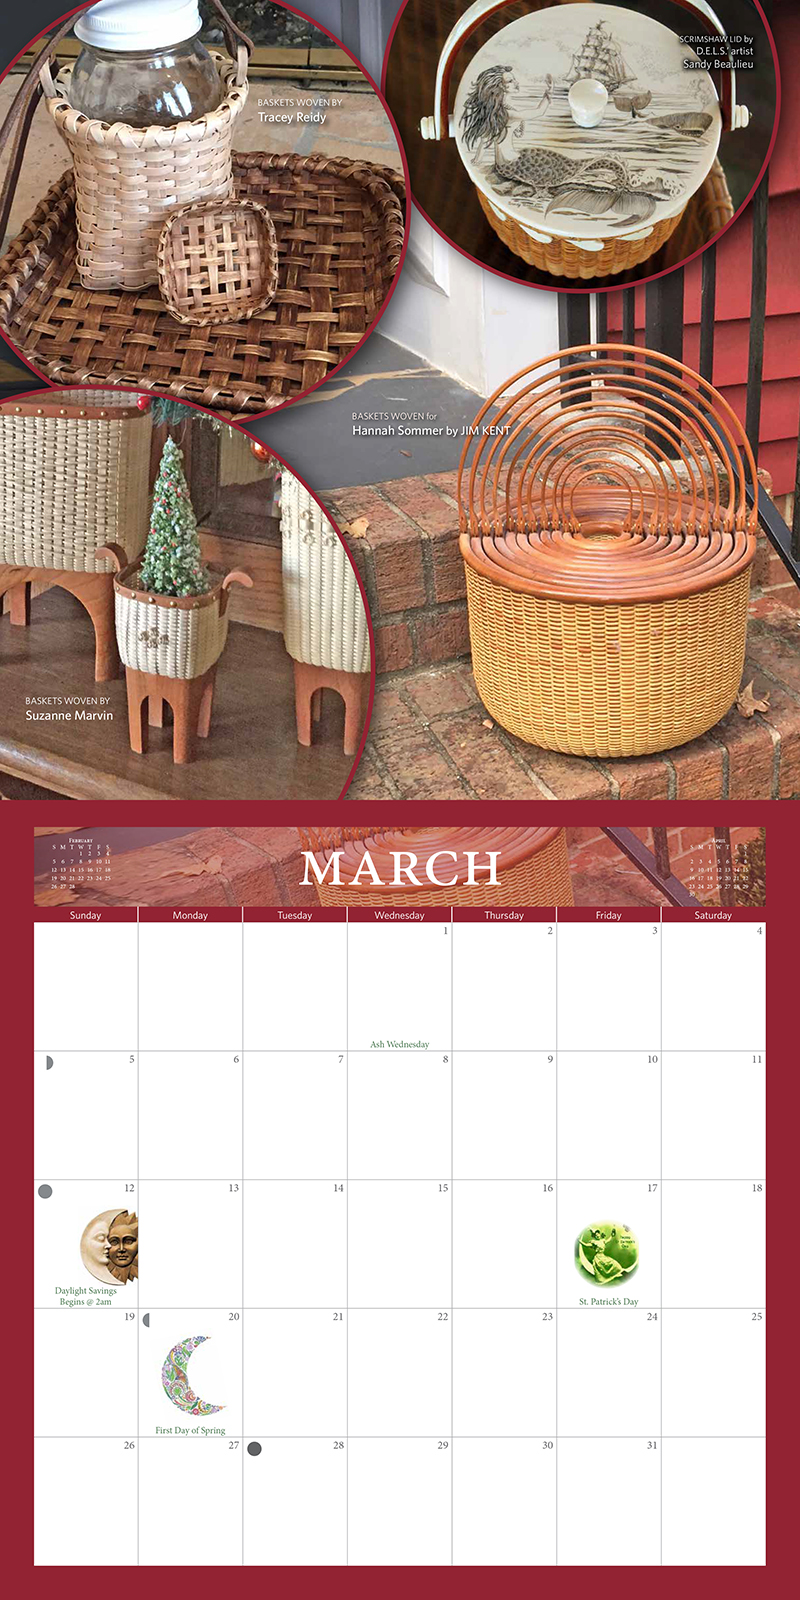 March’s Basket Cottage Calendar Cover Girls Are…